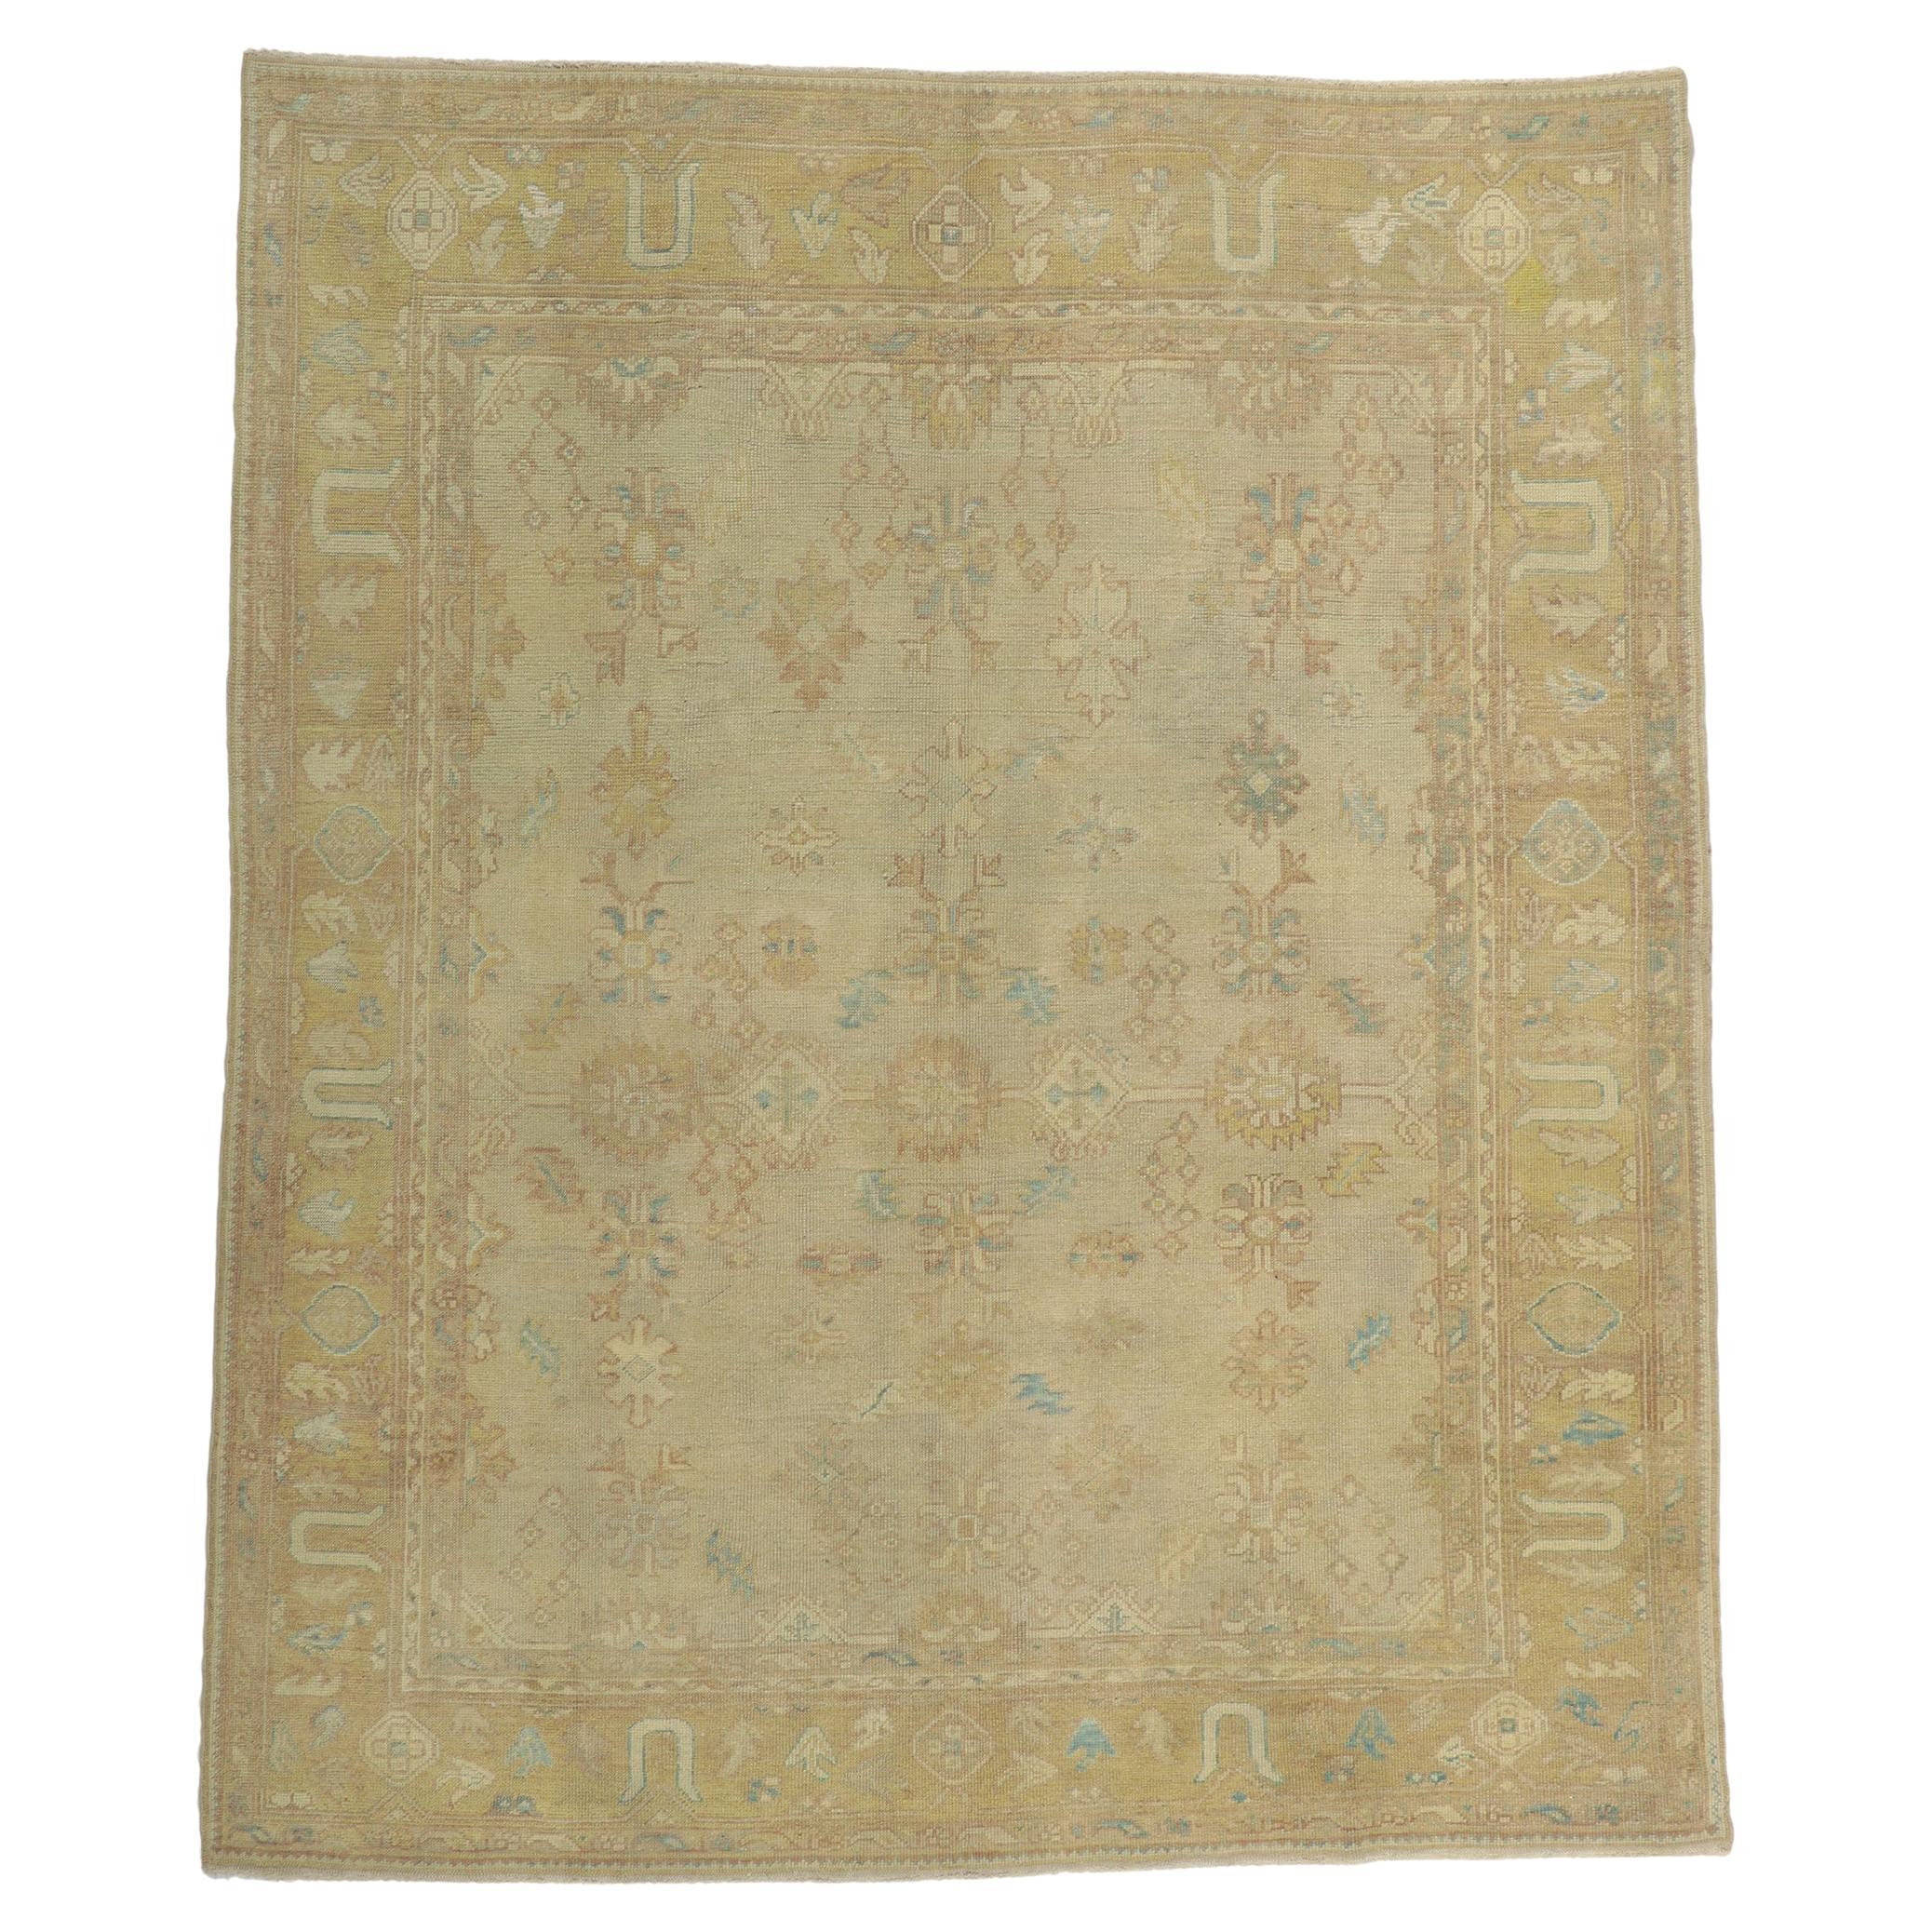 New Vintage-Style Turkish Oushak Rug with Soft Earth-Tone Colors For Sale